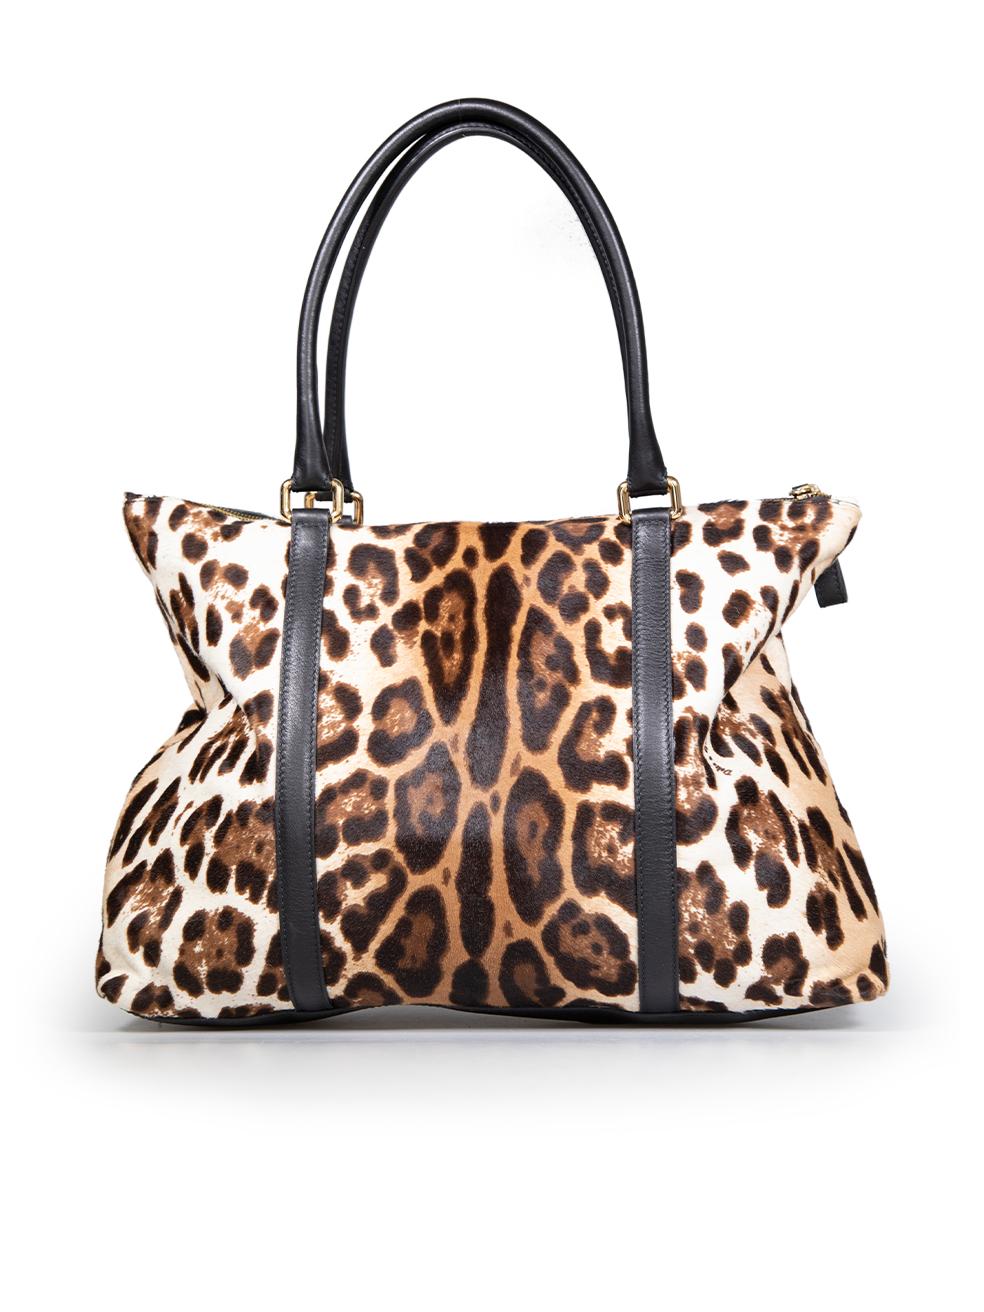 Dolce & Gabbana Brown Ponyhair Leopard Miss Pen Tote Bag In Good Condition For Sale In London, GB